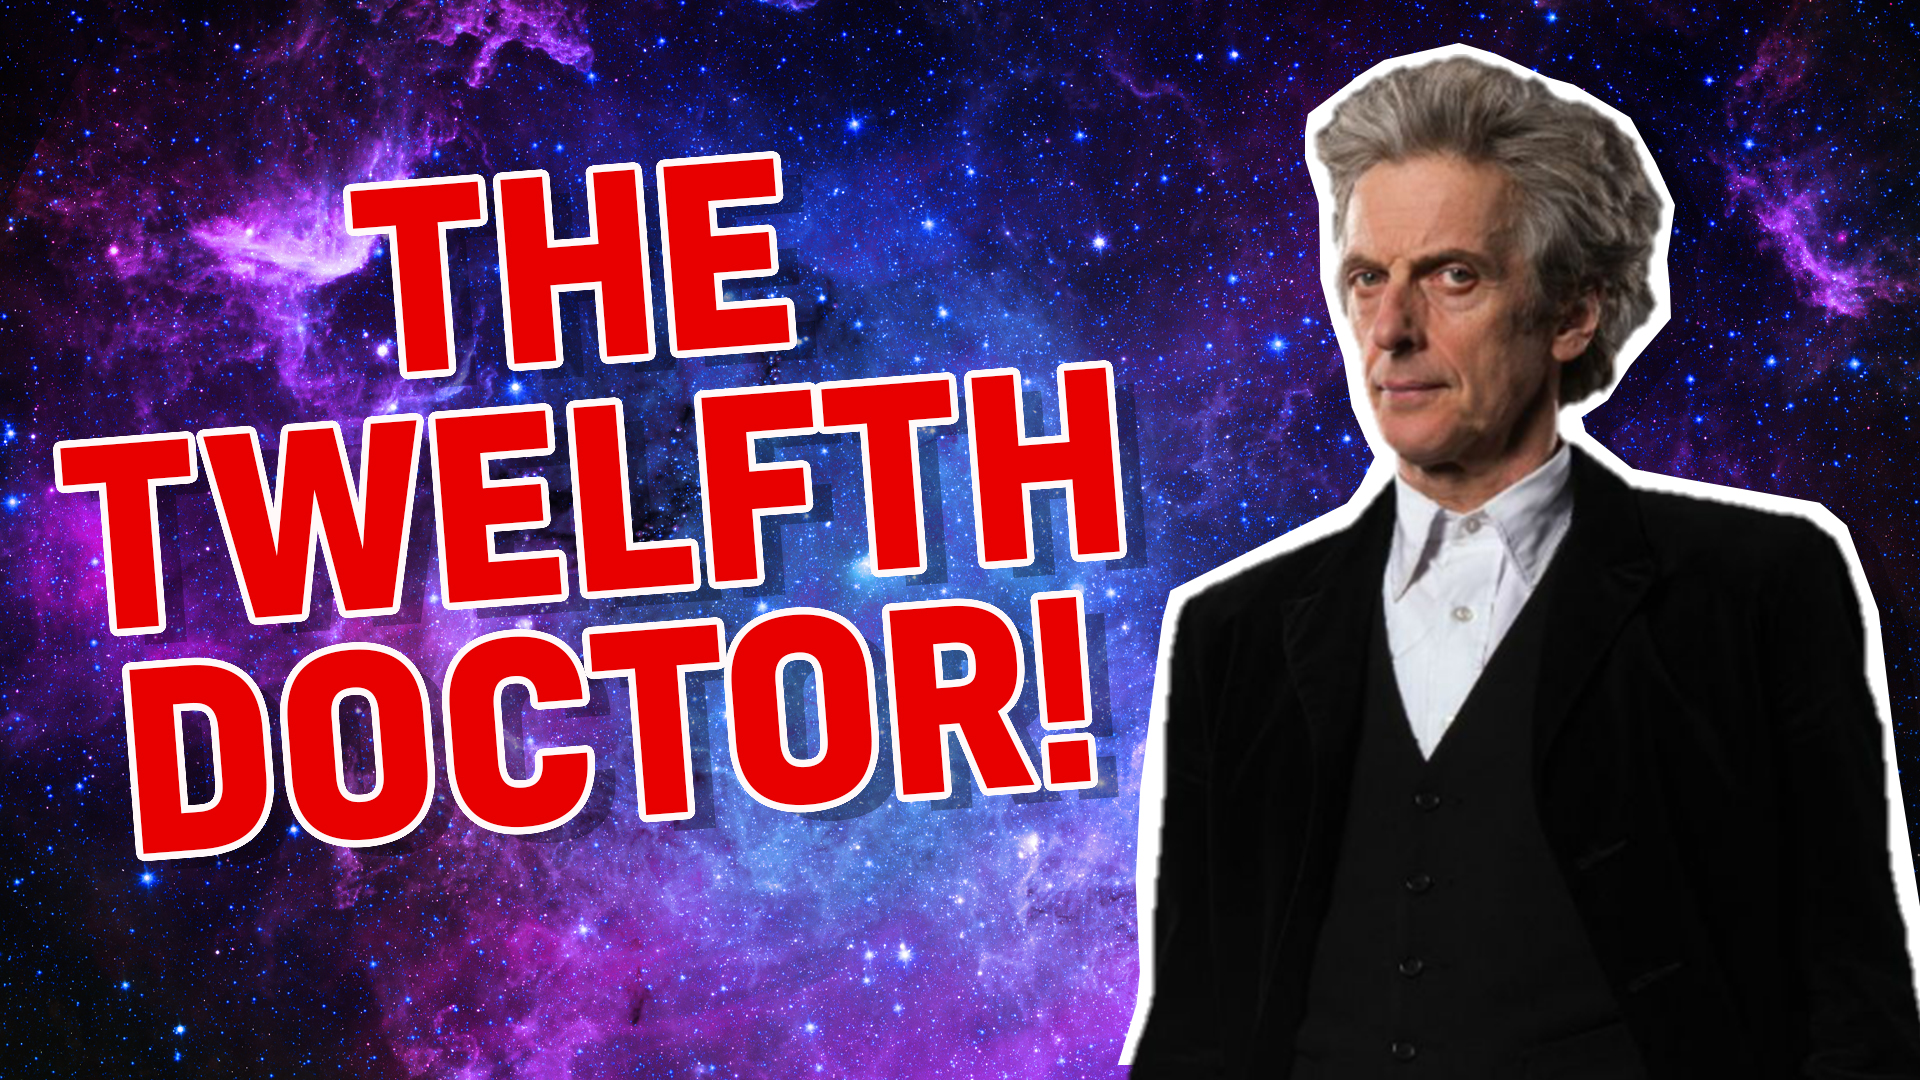 The twelfth Doctor Who